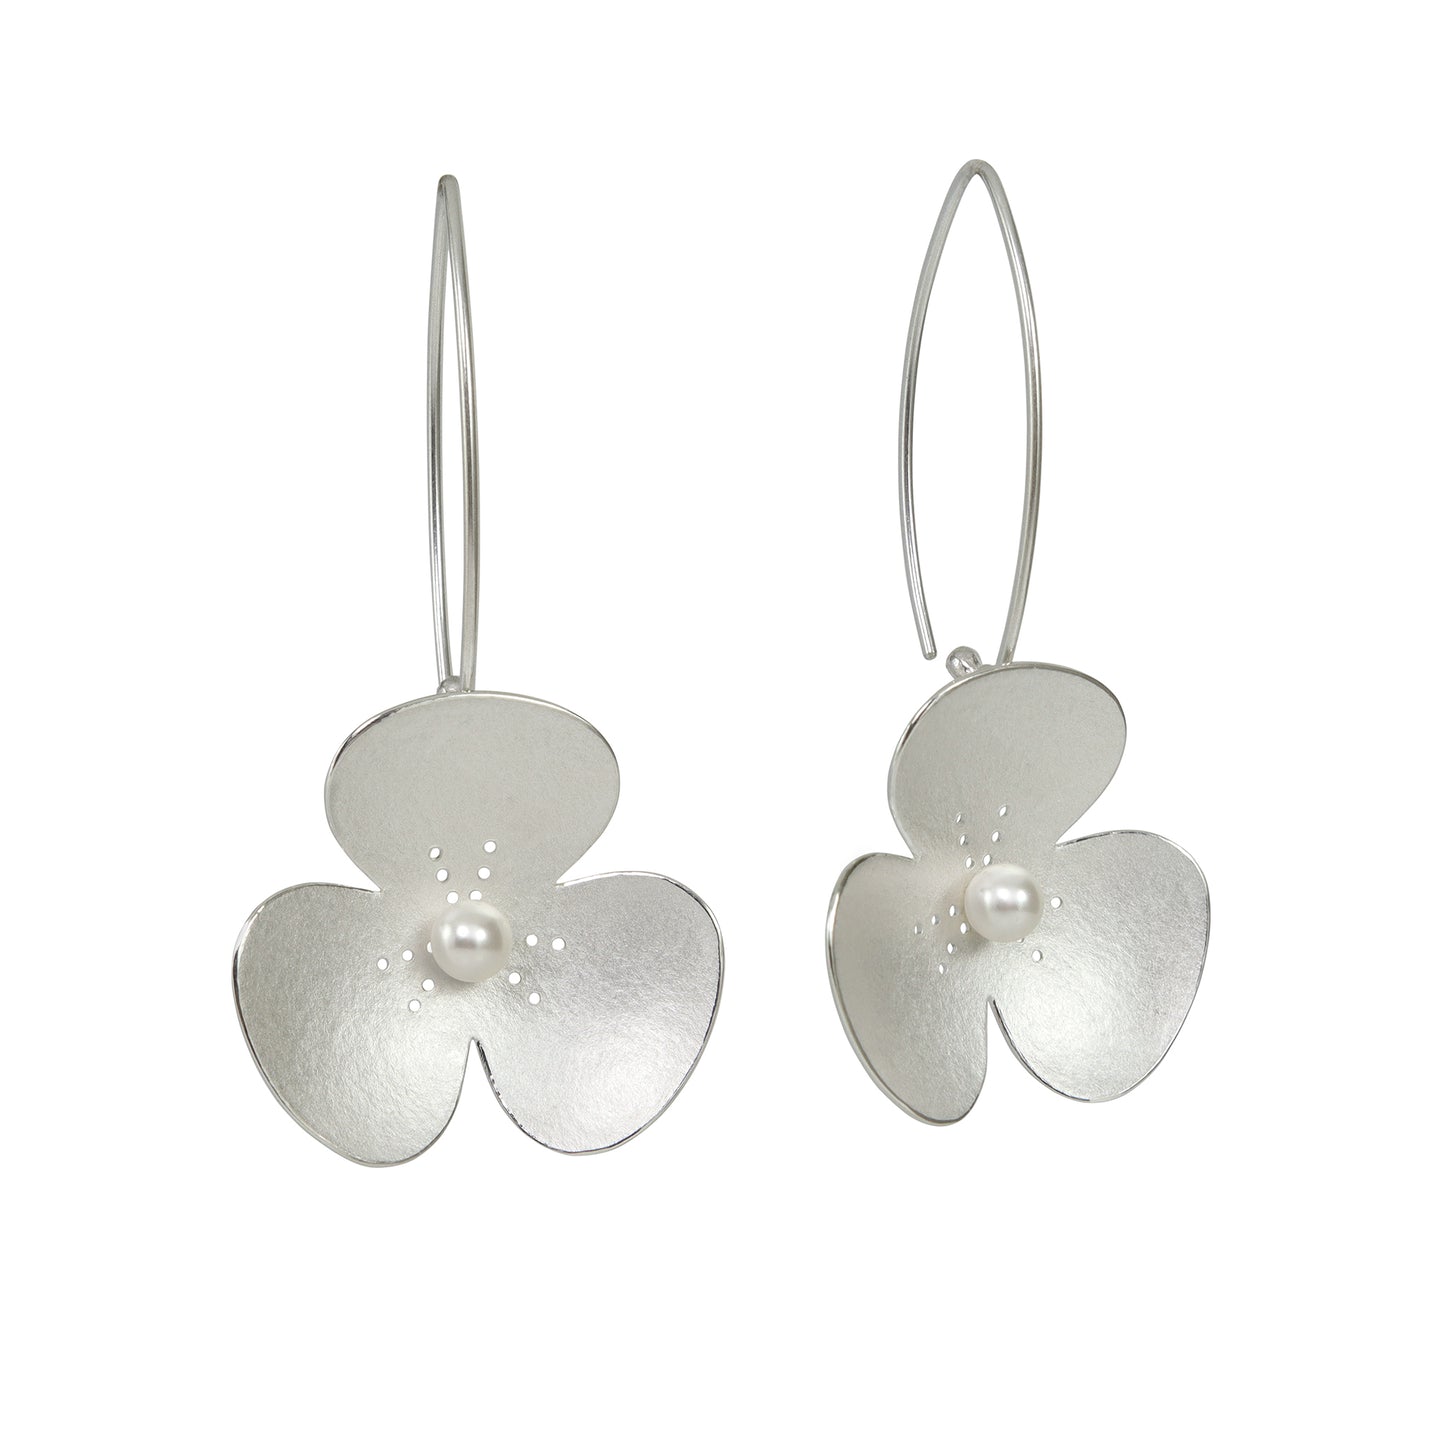 Two Silver and Pearl Poppy hairpins, which instantly convert into earrings